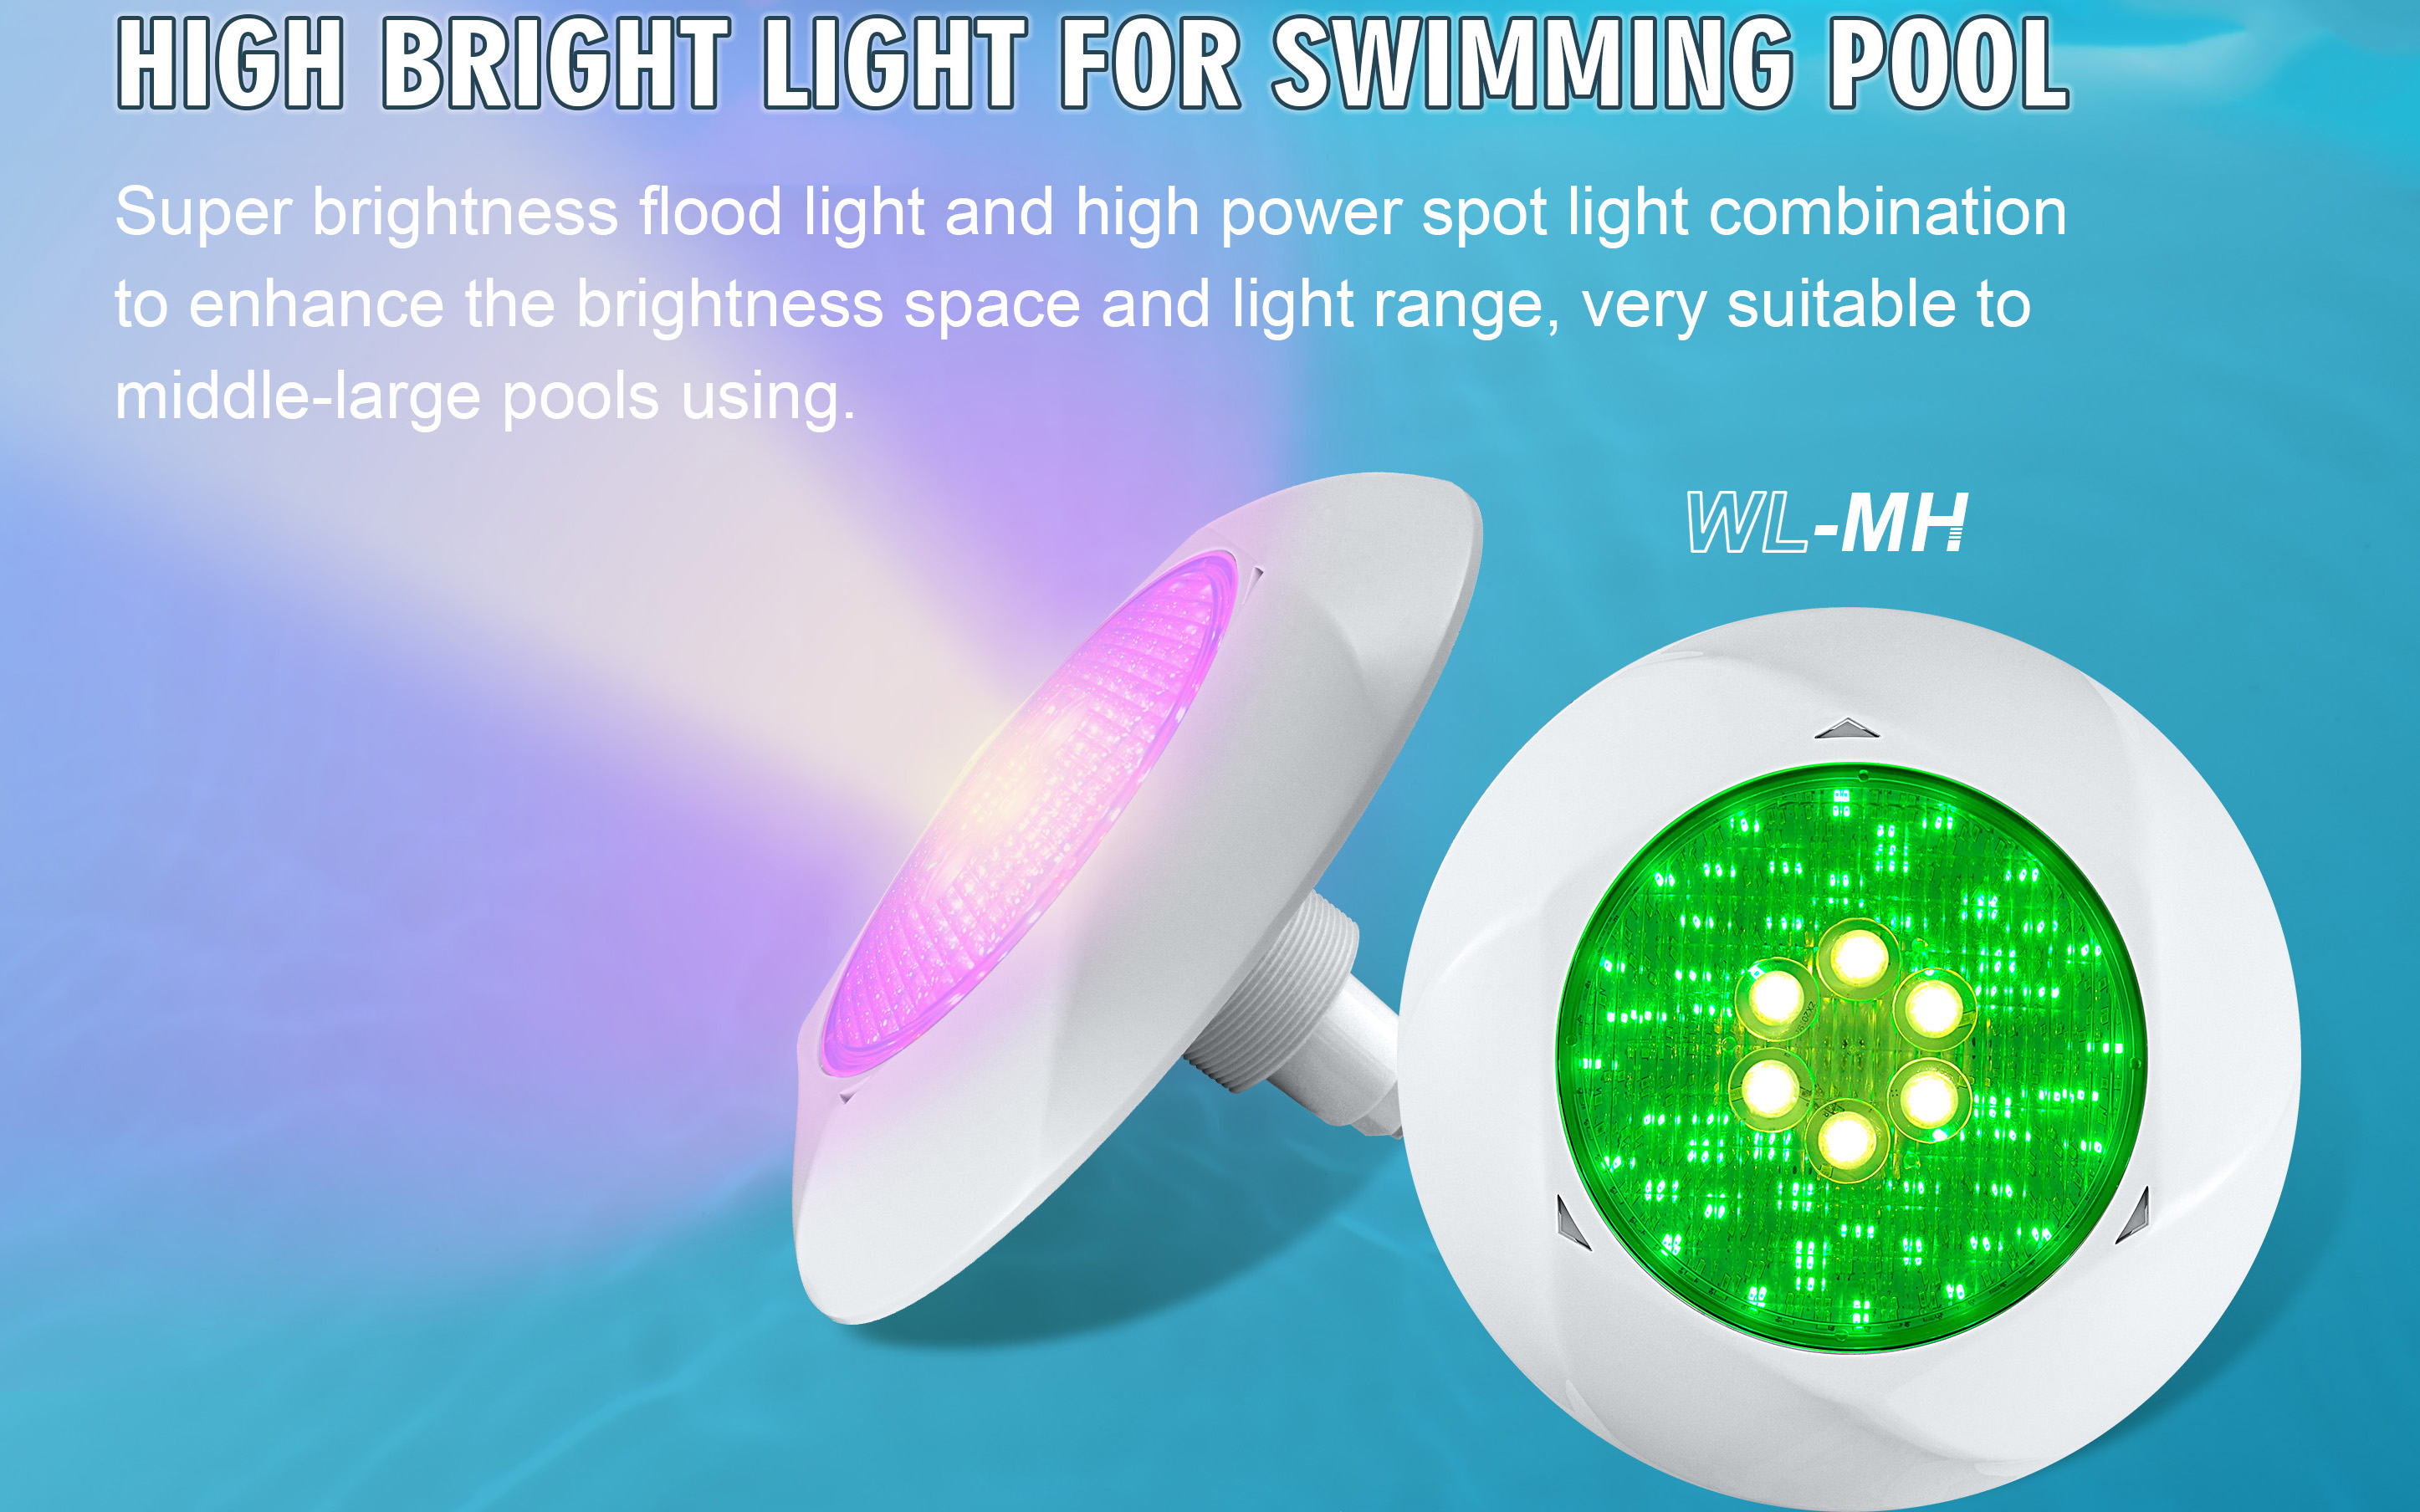 Recommended Product---WL-MH Underwater Light